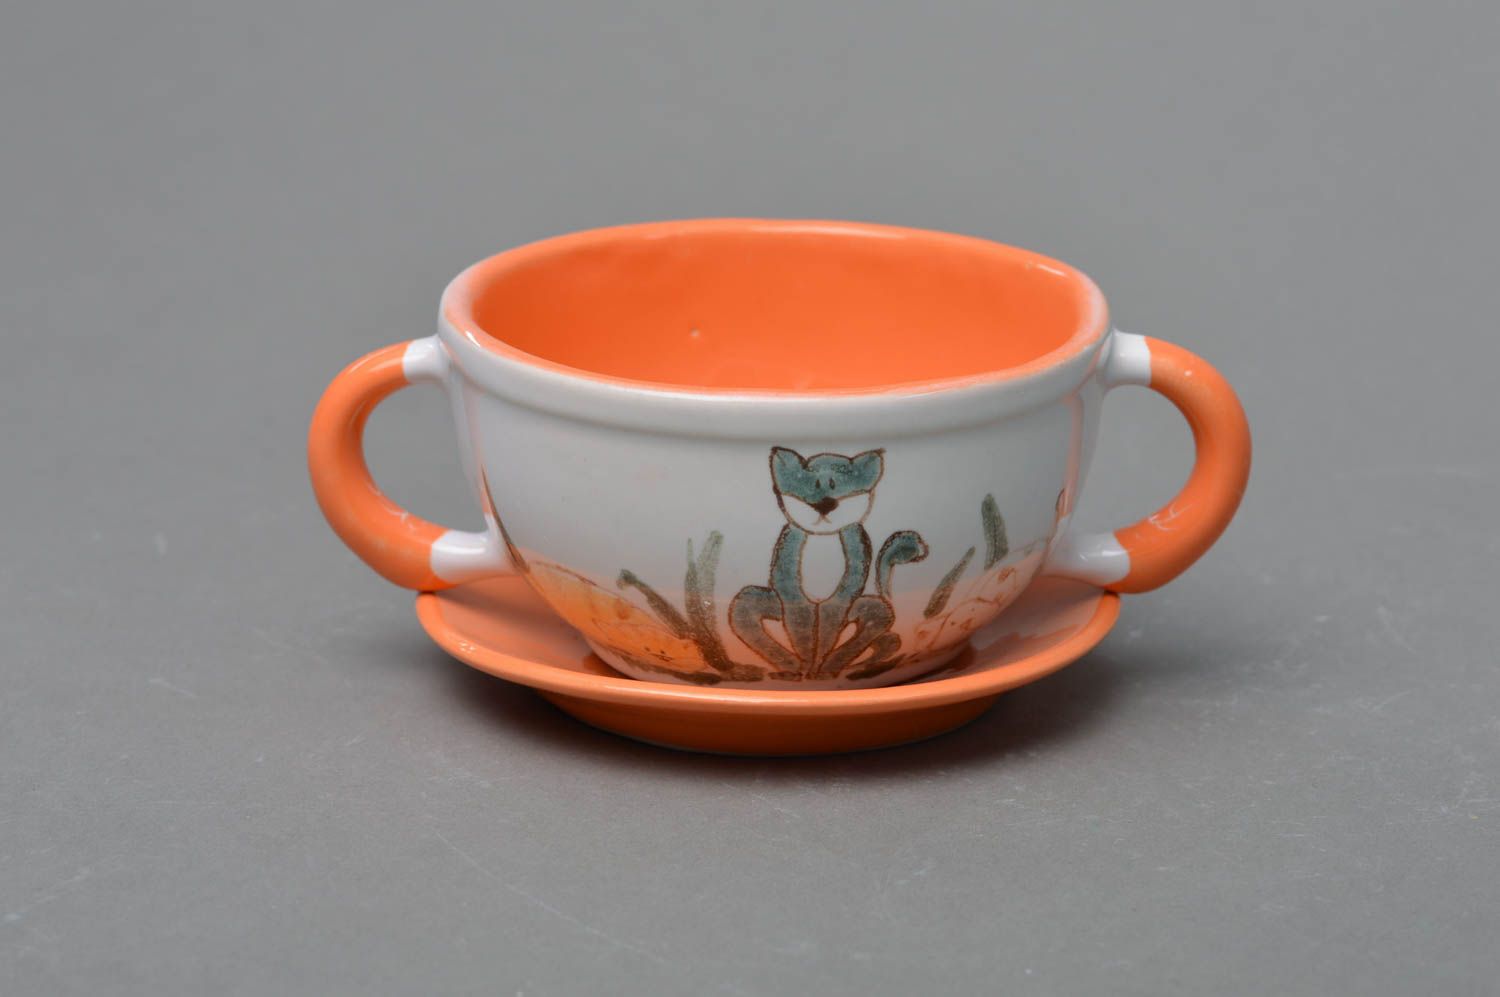 Small kids' ceramic tea cup in white and orange colors with two handles, saucer, and kitty pattern photo 1